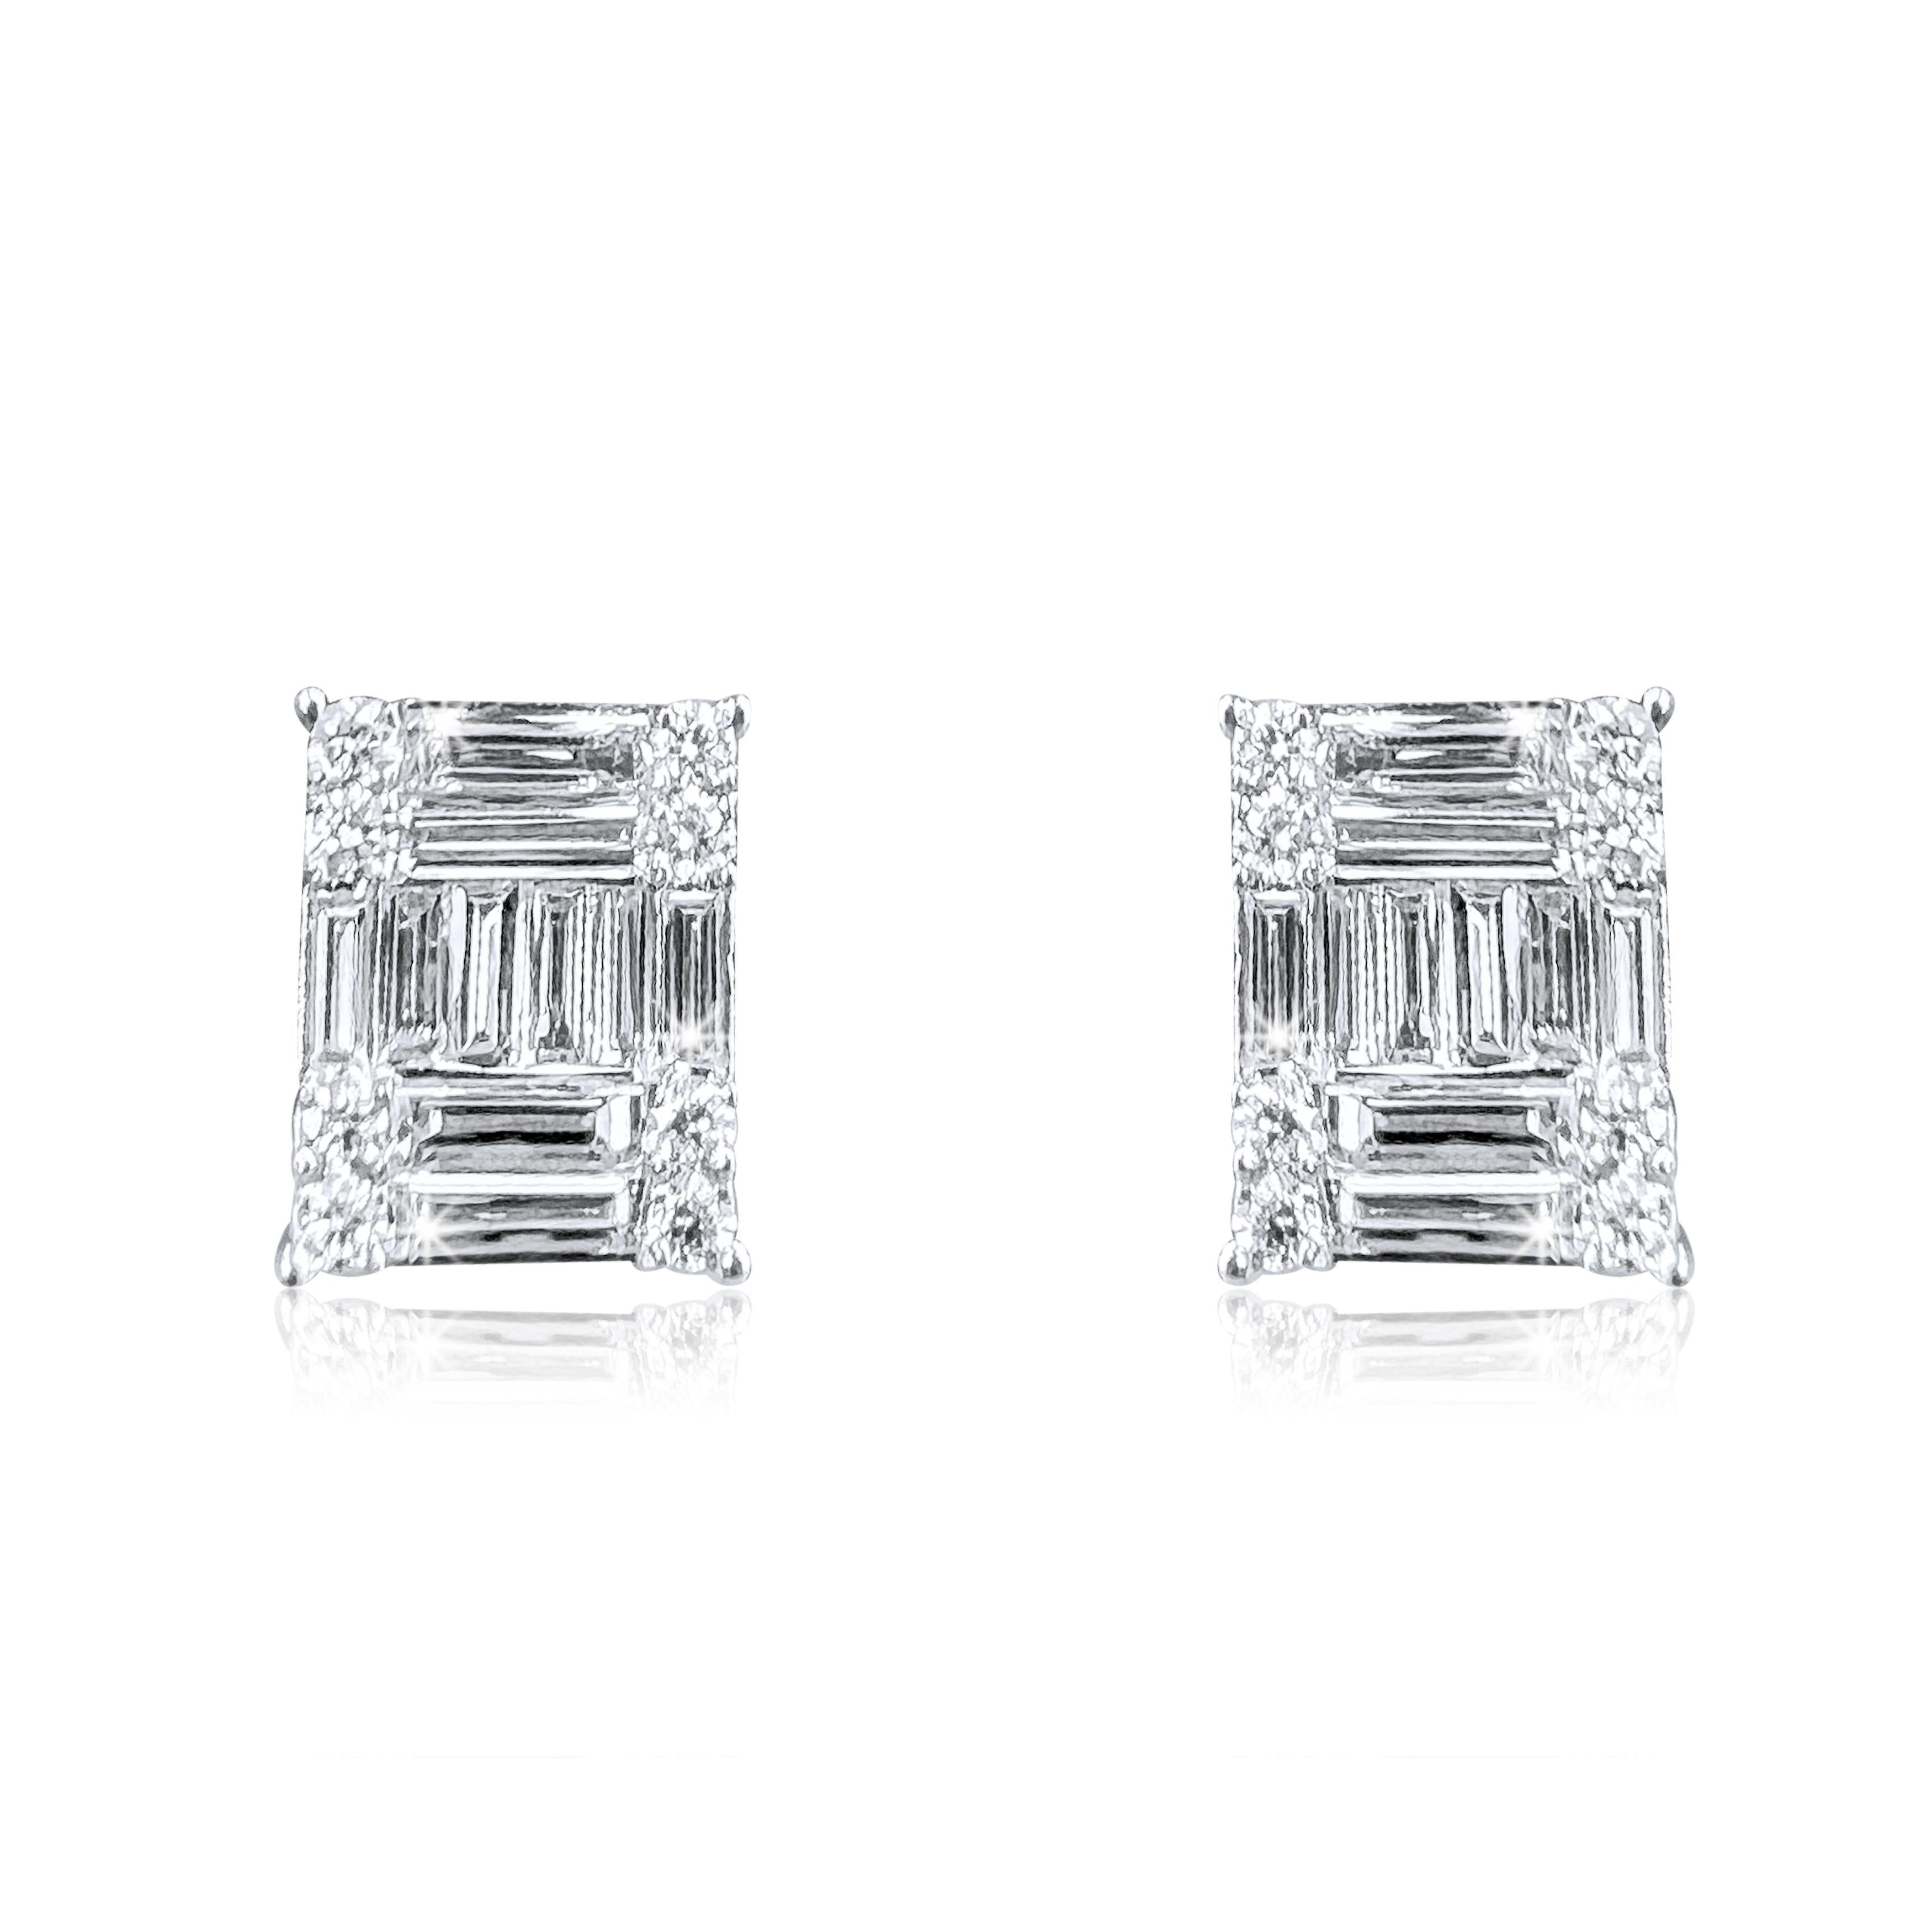 Earring Information
Metal Purity : 18K
Color : White Gold
Gold Weight : 5.21g
Diamond Count : 16 Round Diamonds
Round Diamond Carat Weight : 0.47 ttcw
Baguette Diamonds Count : 20
Baguette Diamonds Carat Weight : 1.93 ttcw
Serial #EA18443
 
Crafted